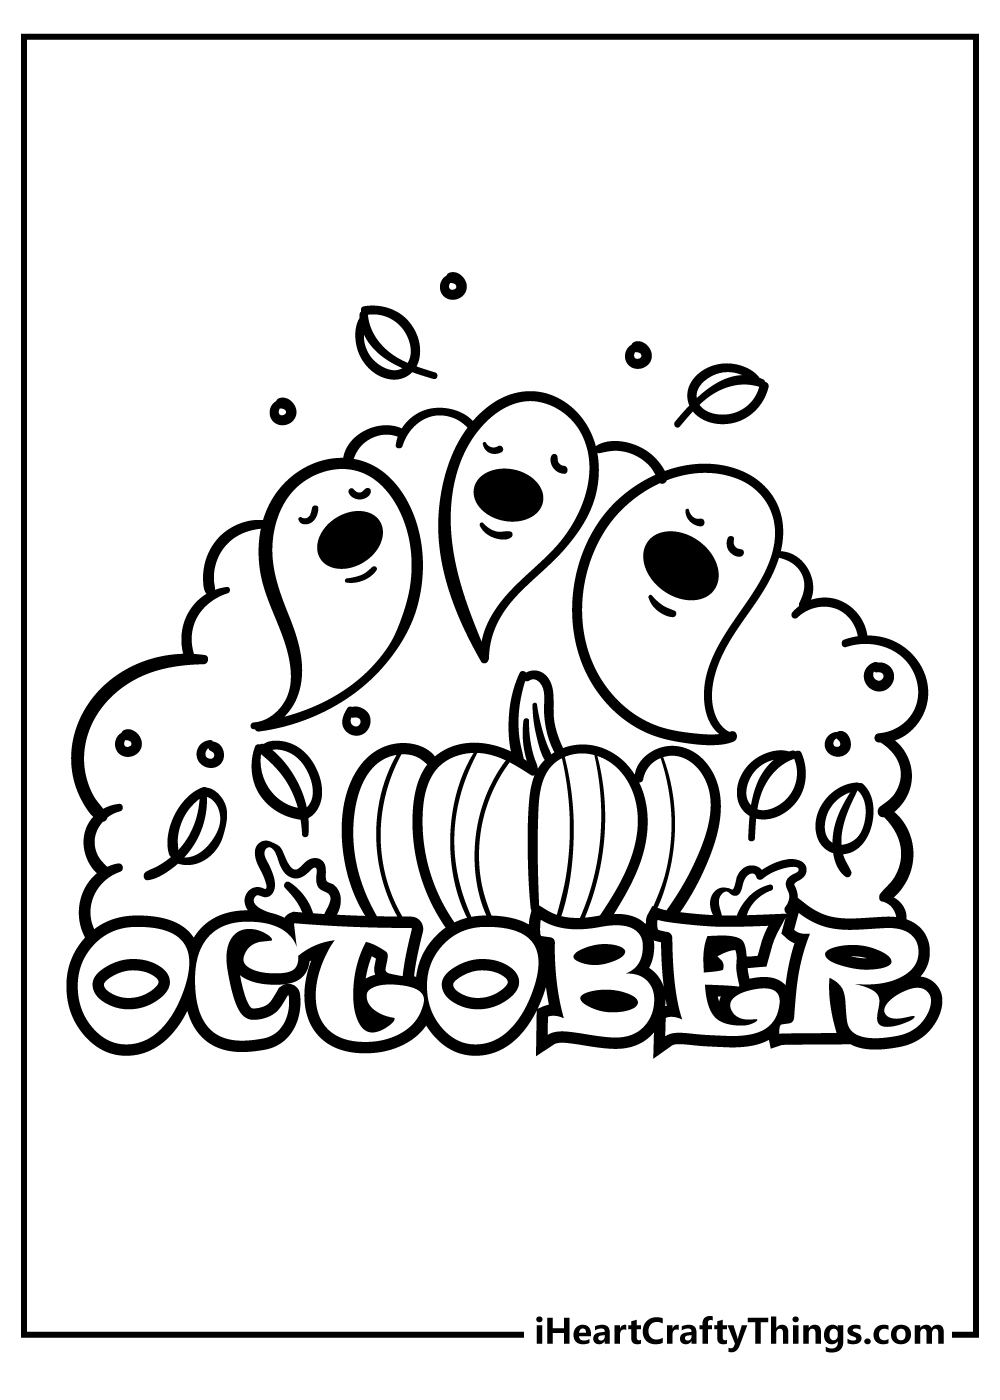 October Coloring Book free printable